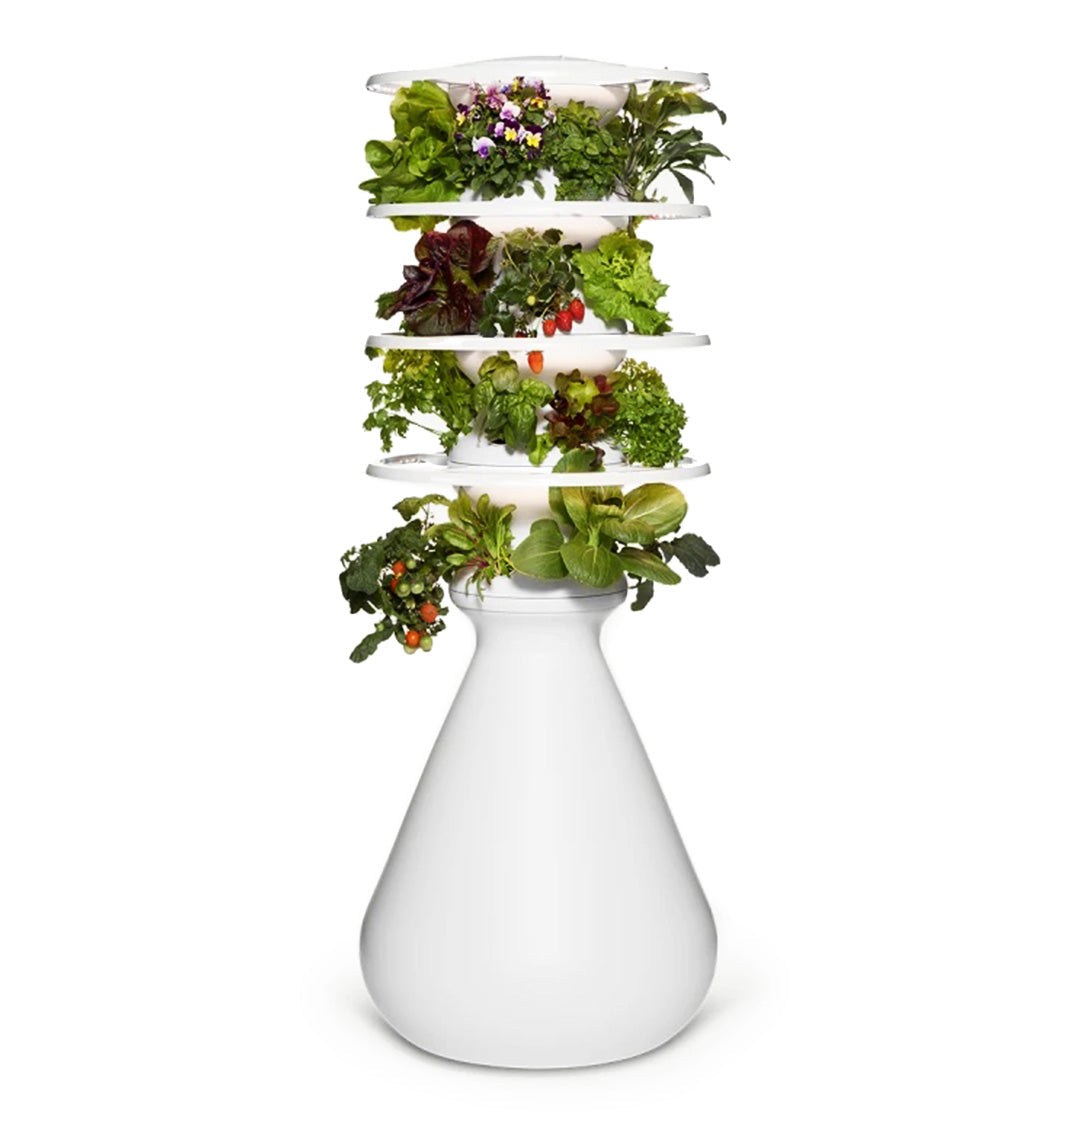 Ozogrows by Ozobot best indoor growing plant tower kit for classrooms